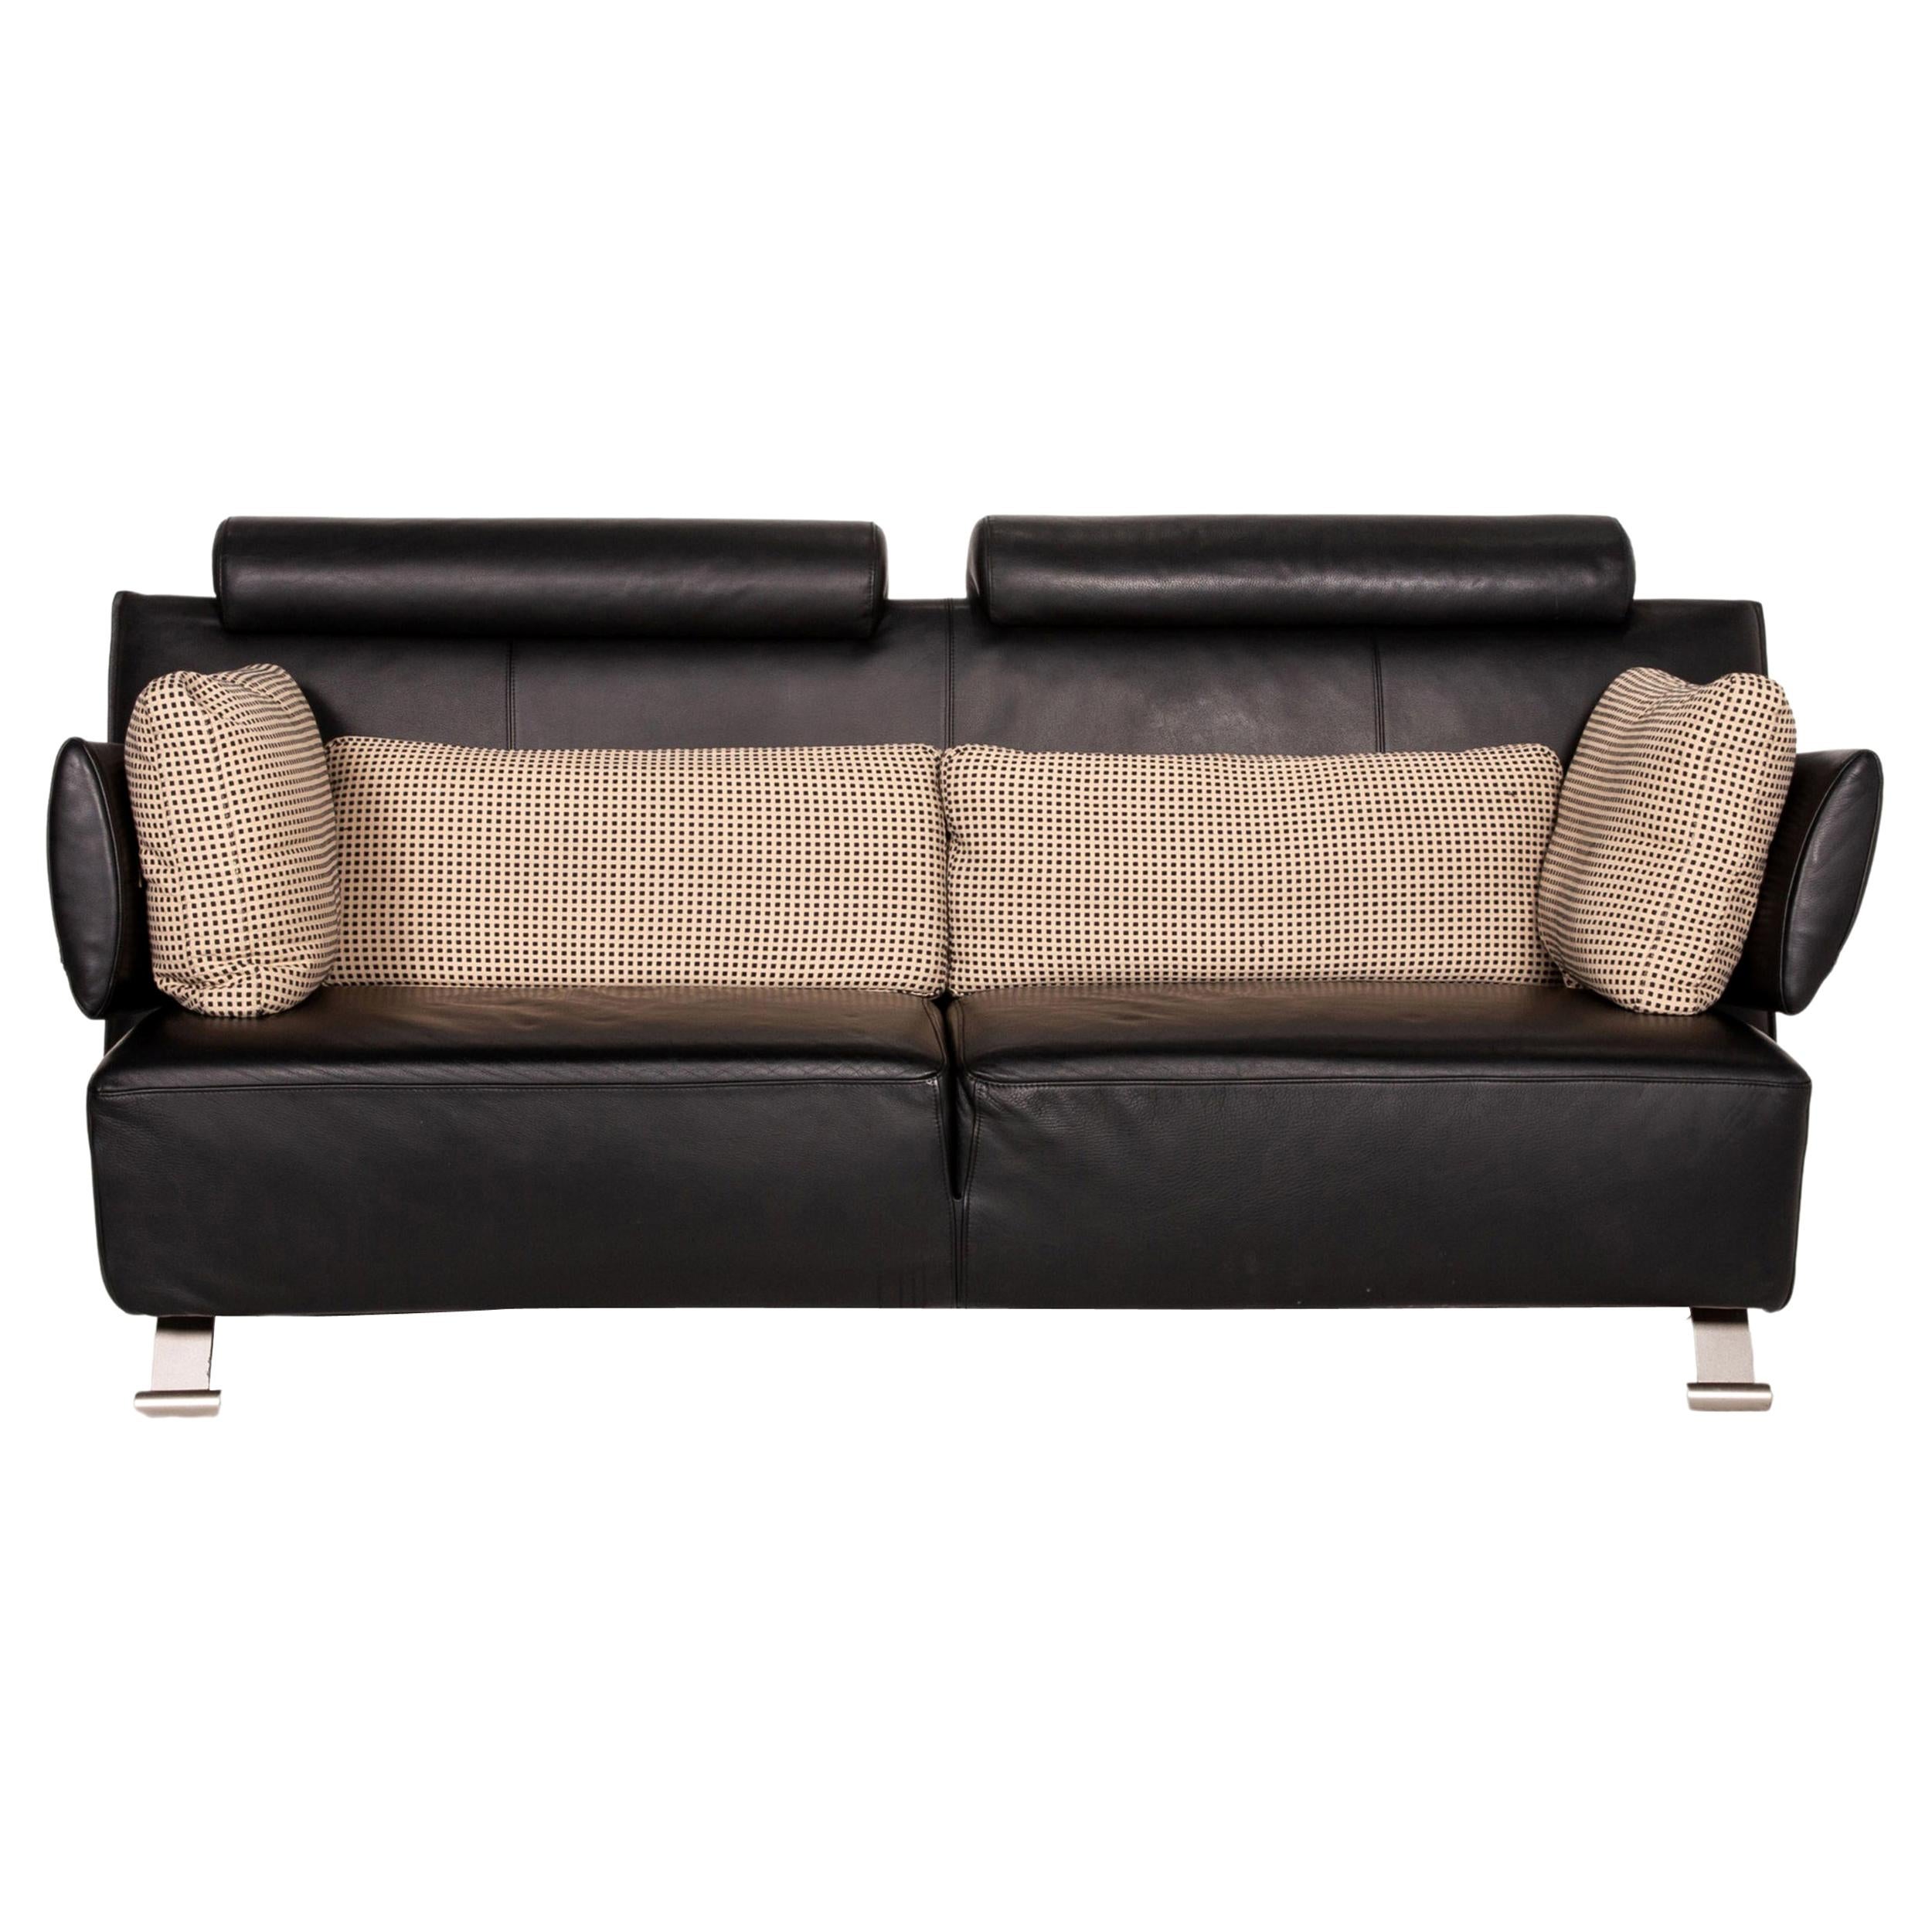 COR Sera Leather Sofa Black Two-Seater Function Couch For Sale